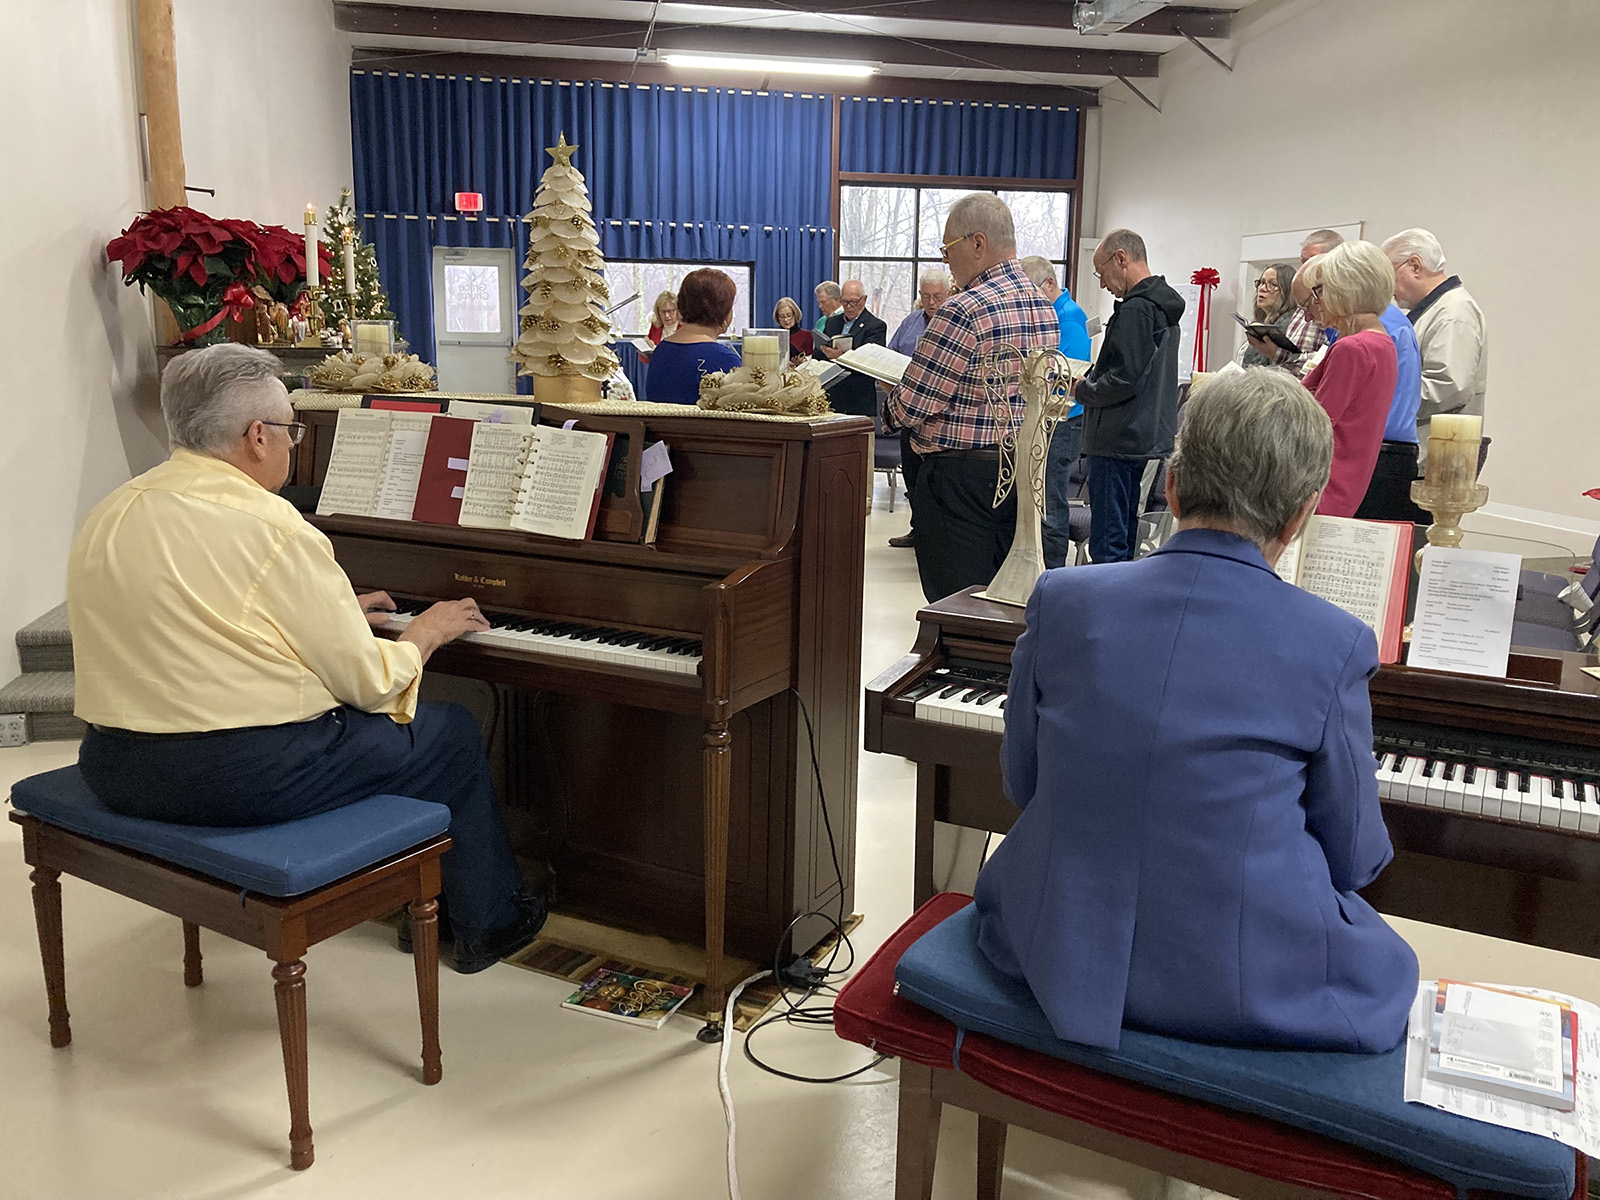 Jim Wilson at the piano, left, and June Buzzard at the organ, right, lead Grace United Methodist Mission in music, Sunday, Dec. 3, 2023, in on Dec. 3, 2023, in Advance, North Carolina. (RNS photo/Yonat Shimron)